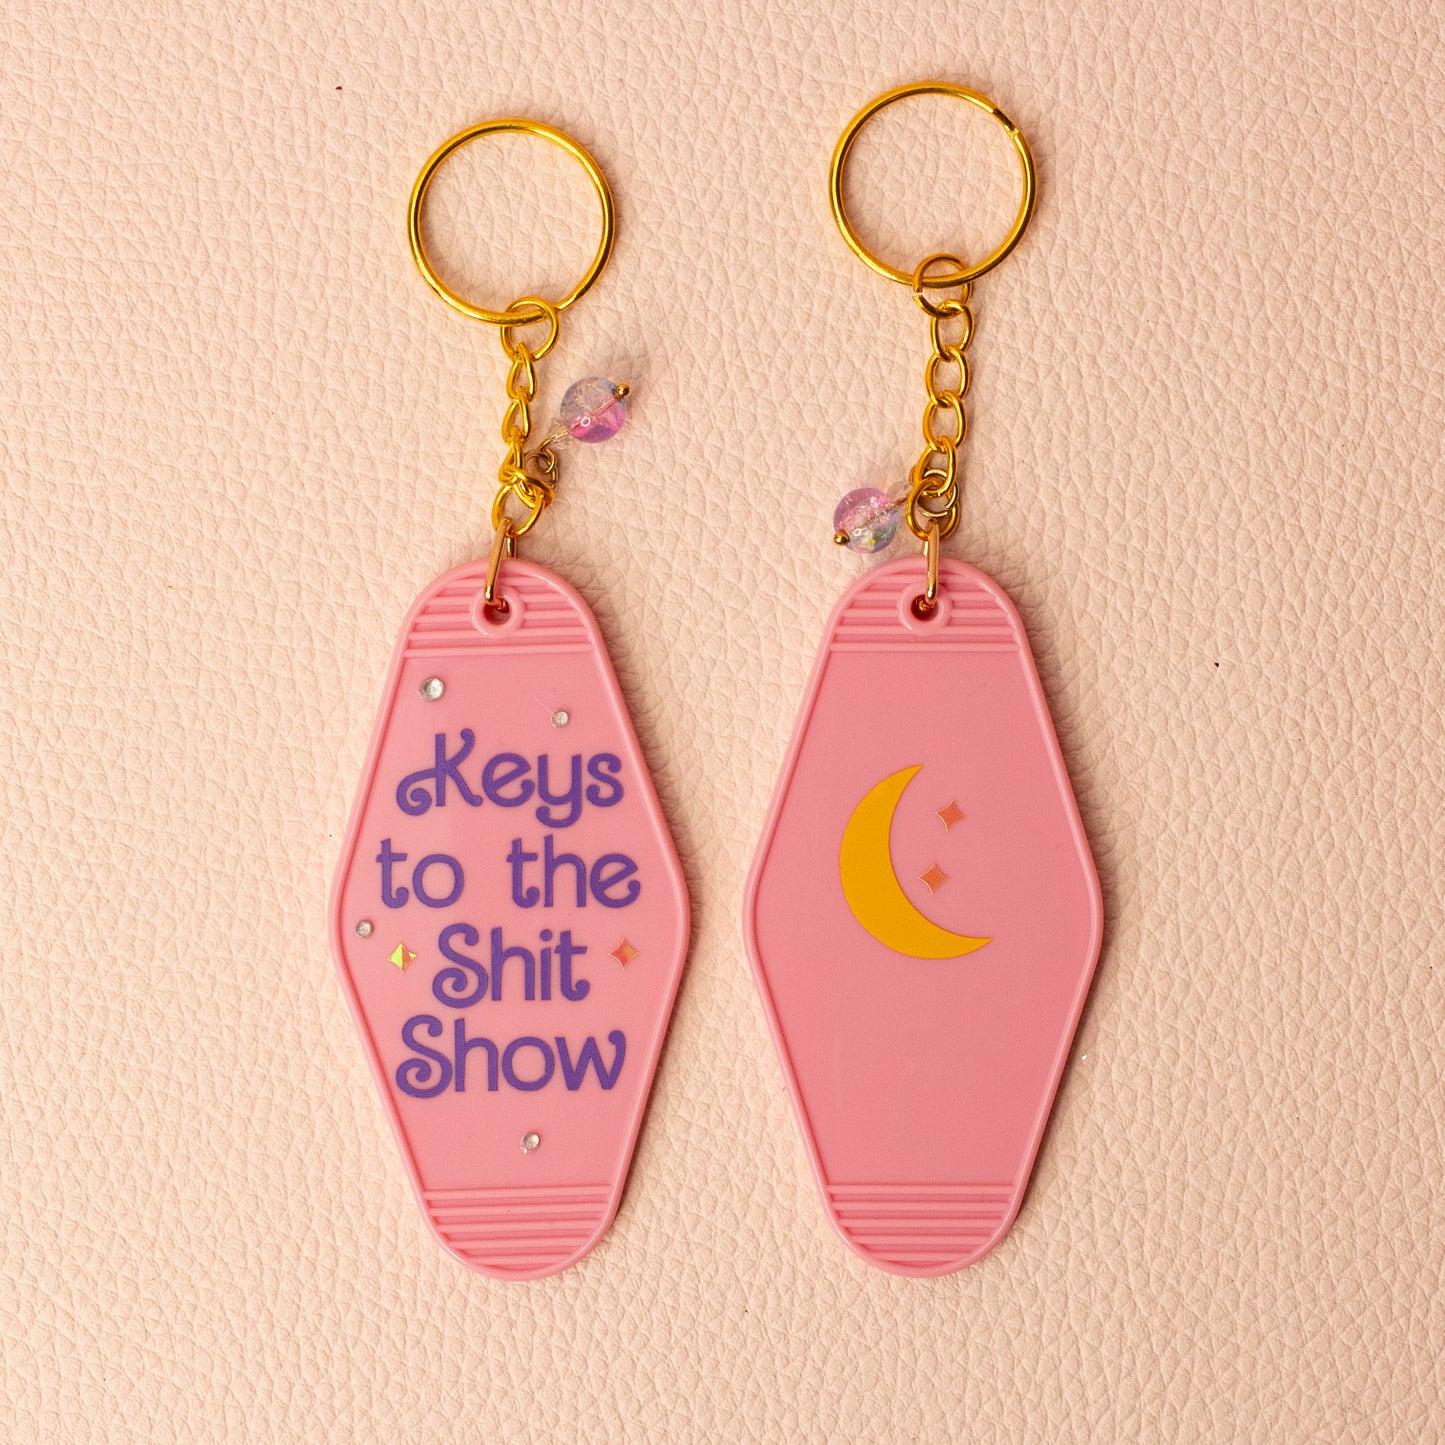 🌙 'Keys to the Shit Show' Keychain with Crystals & Crescent Moon